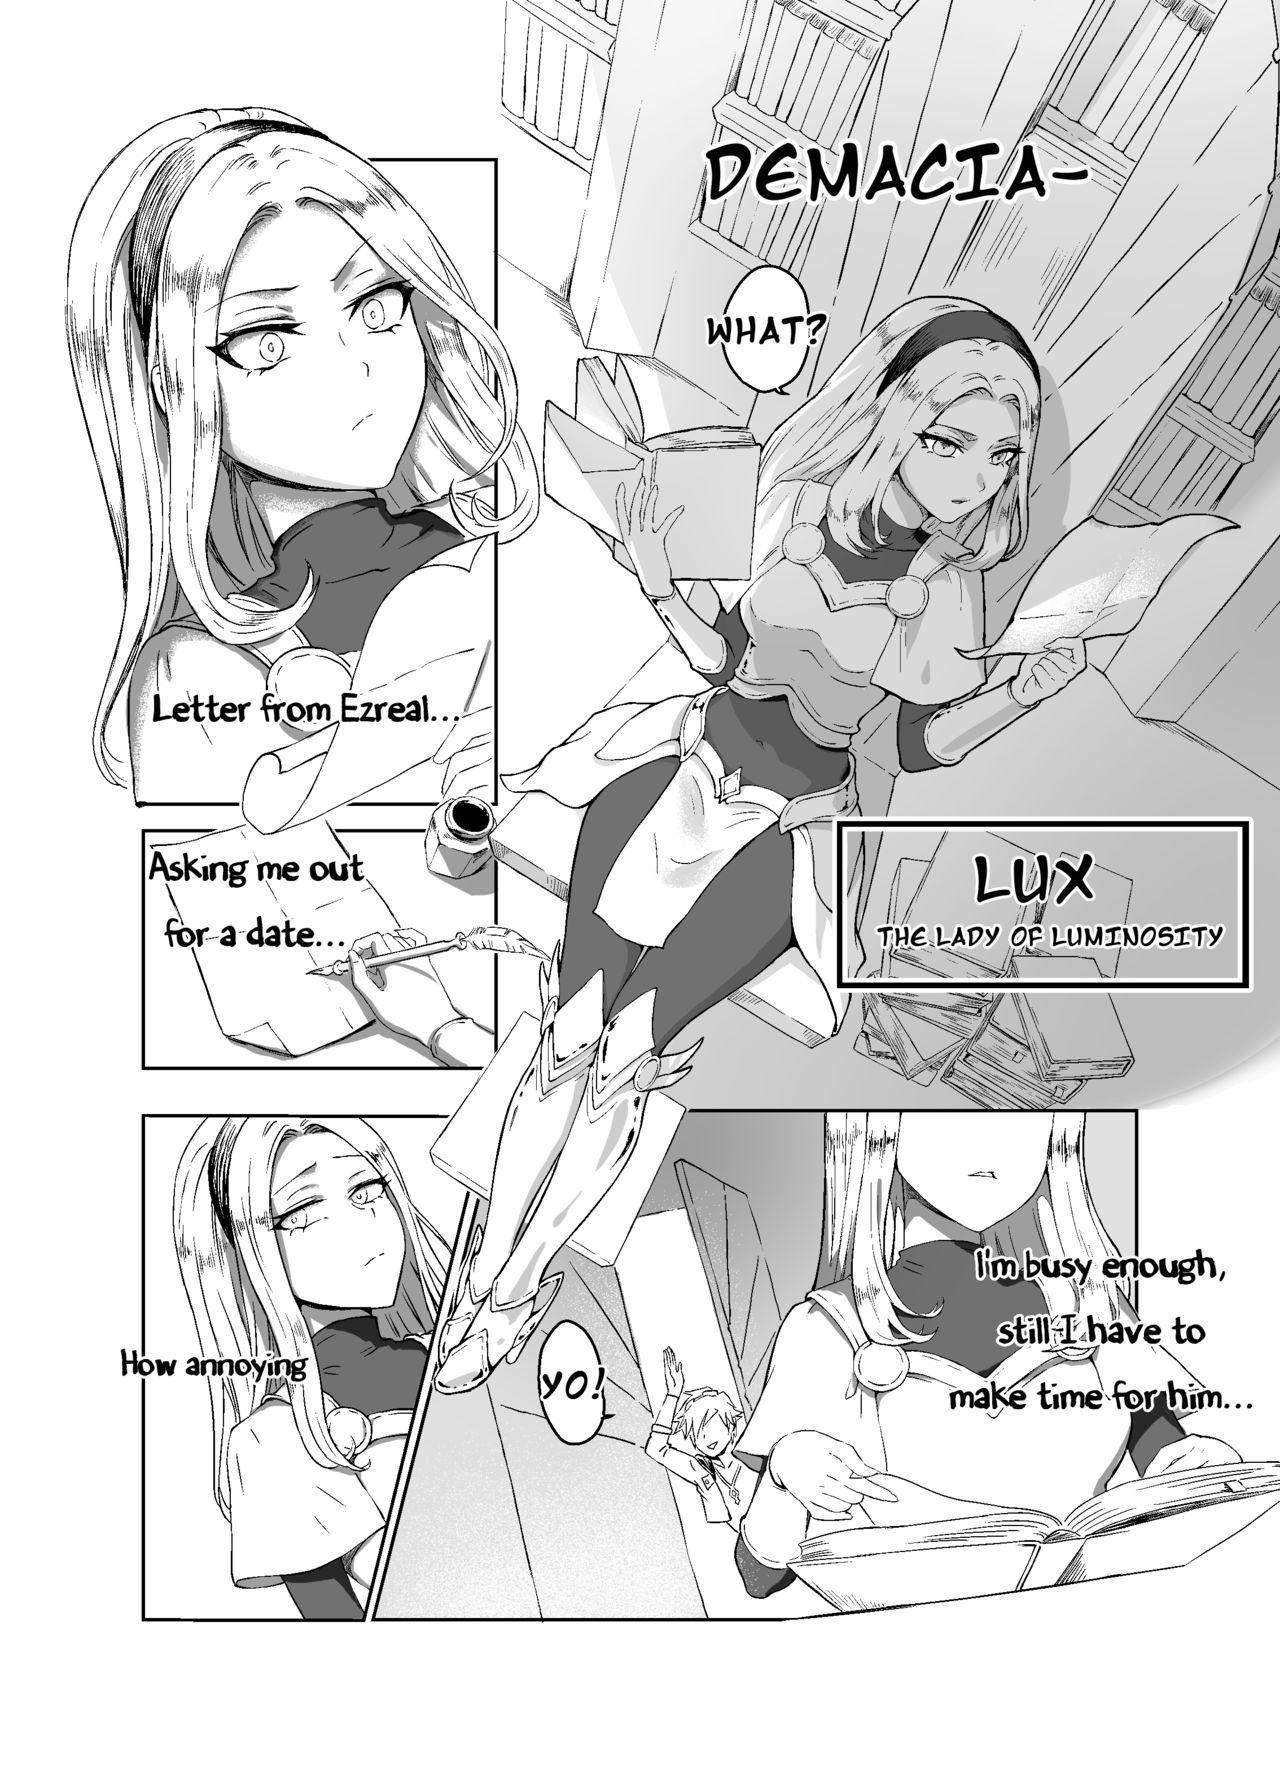 Sem Camisinha Lux x Viego ft. Ezreal - League of legends Arabe - Page 2